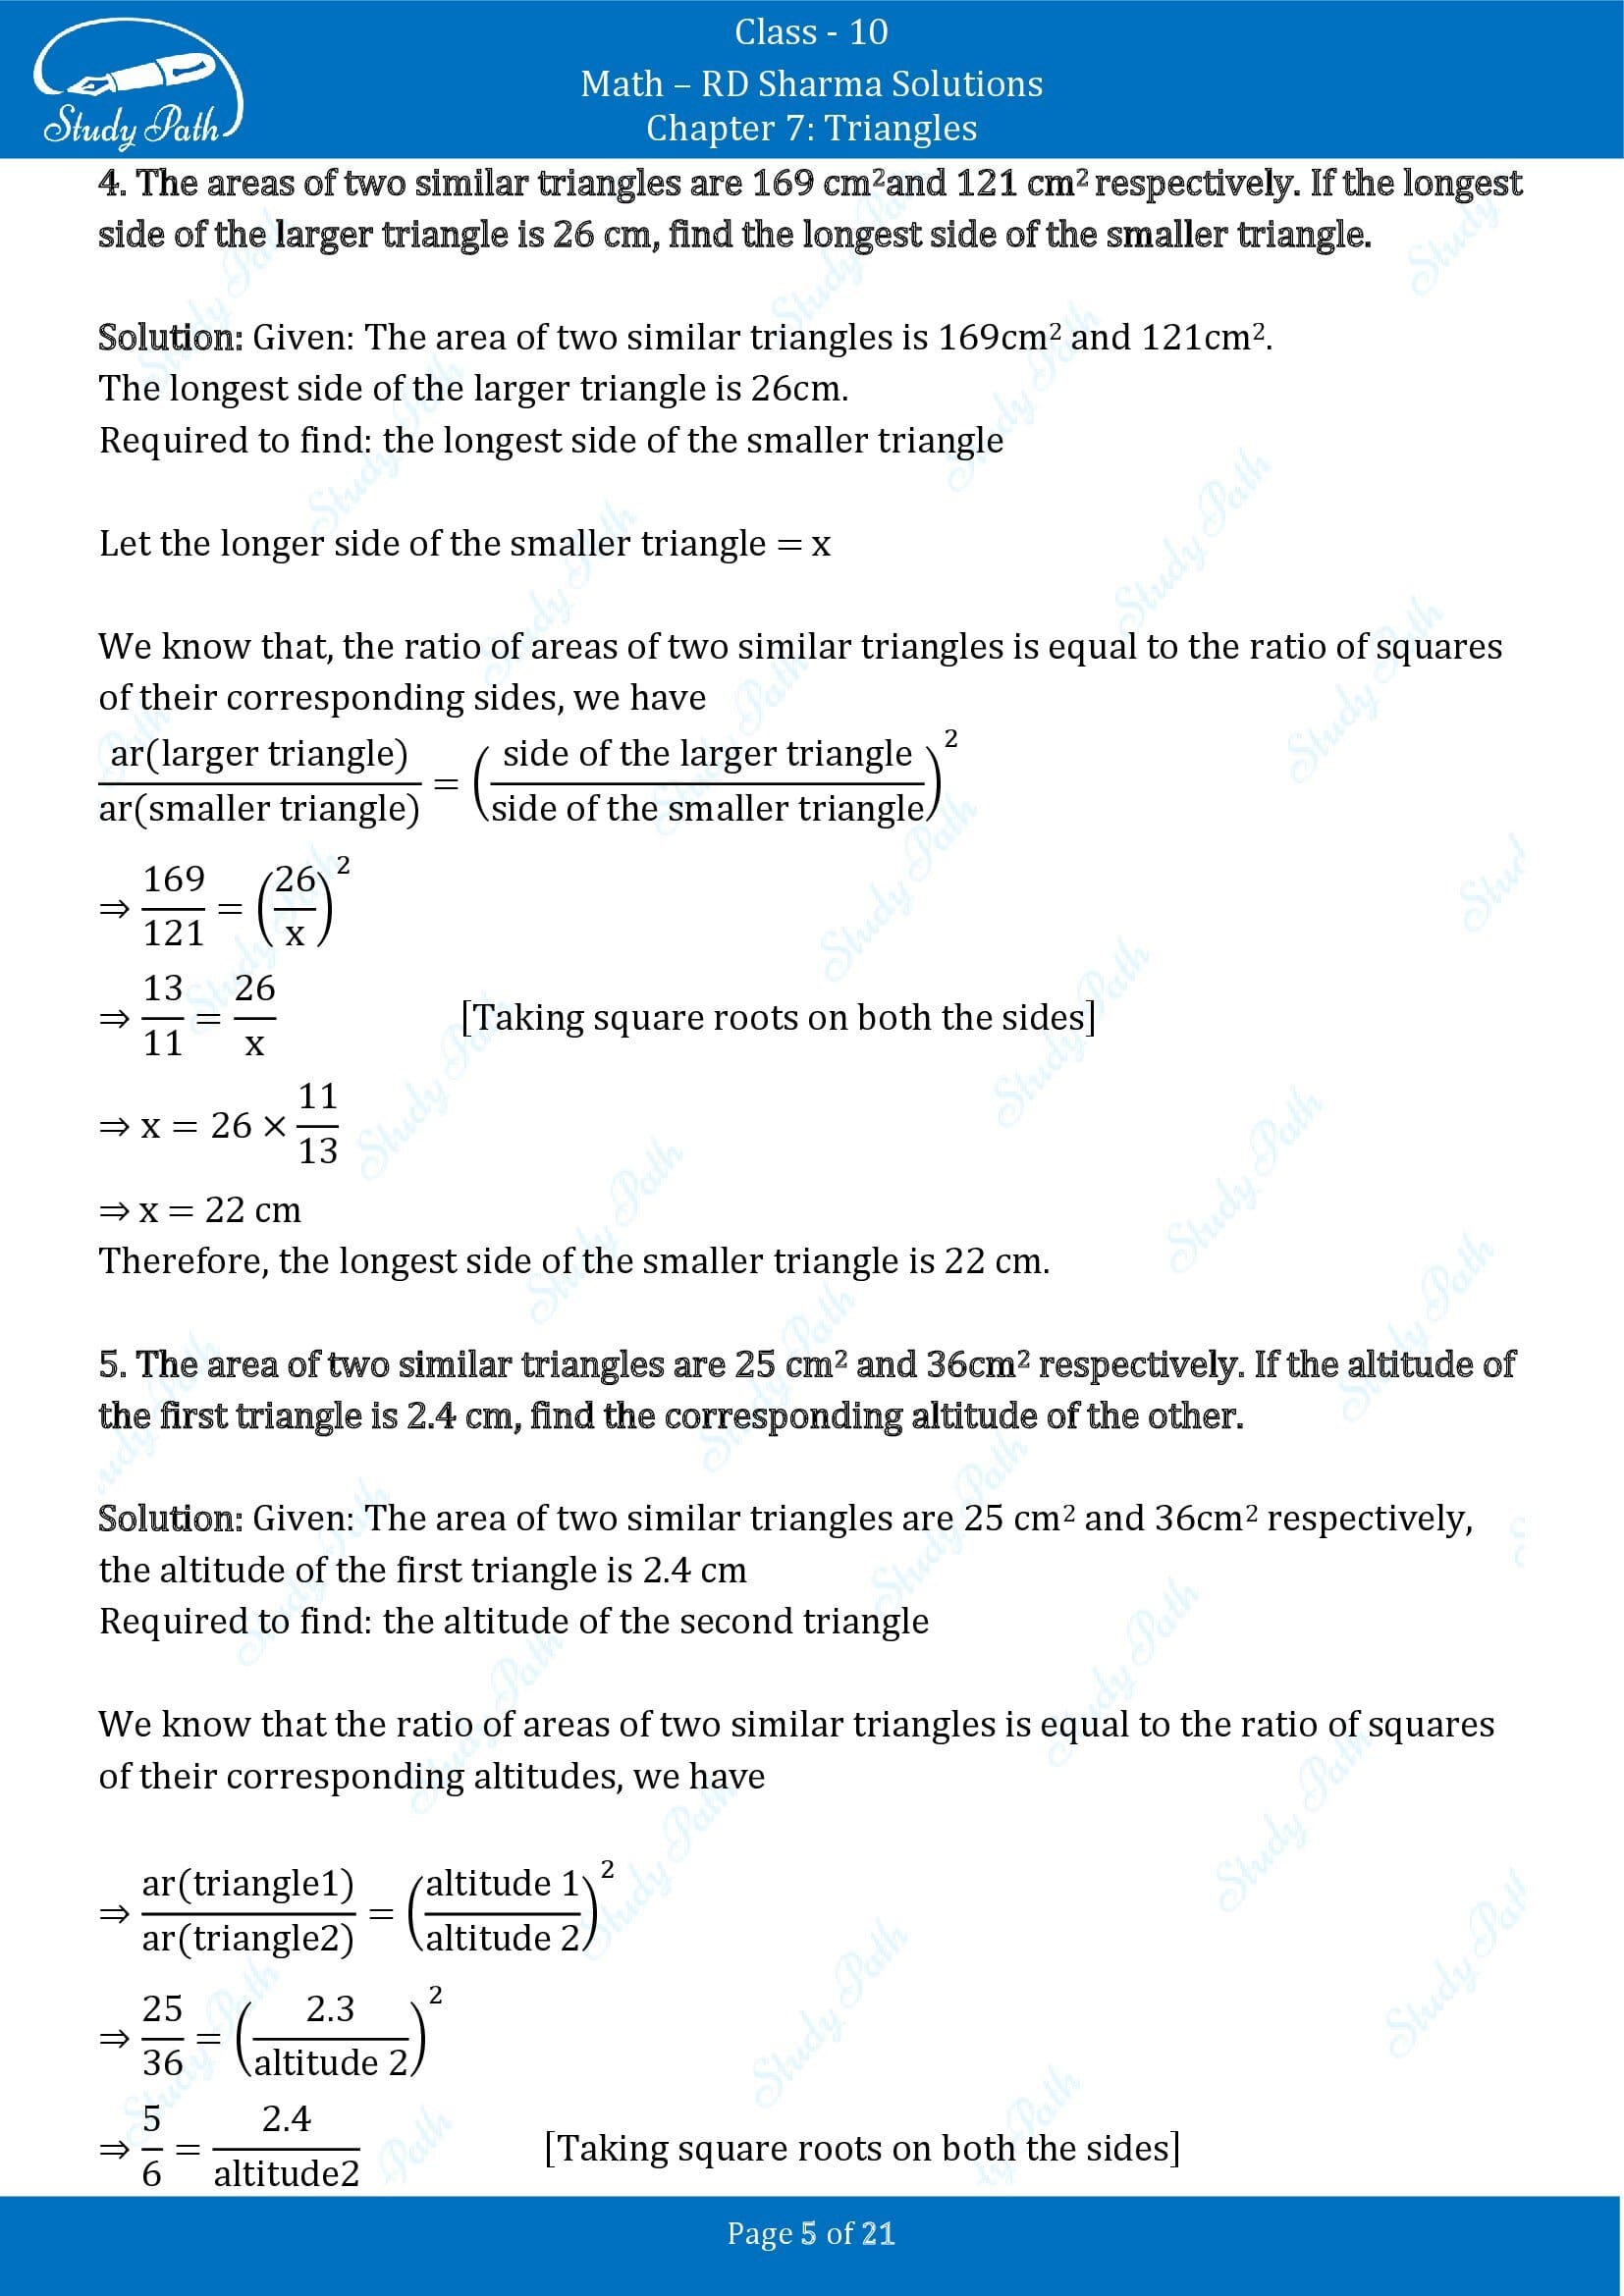 RD Sharma Solutions Class 10 Chapter 7 Triangles Exercise 7.6 00005